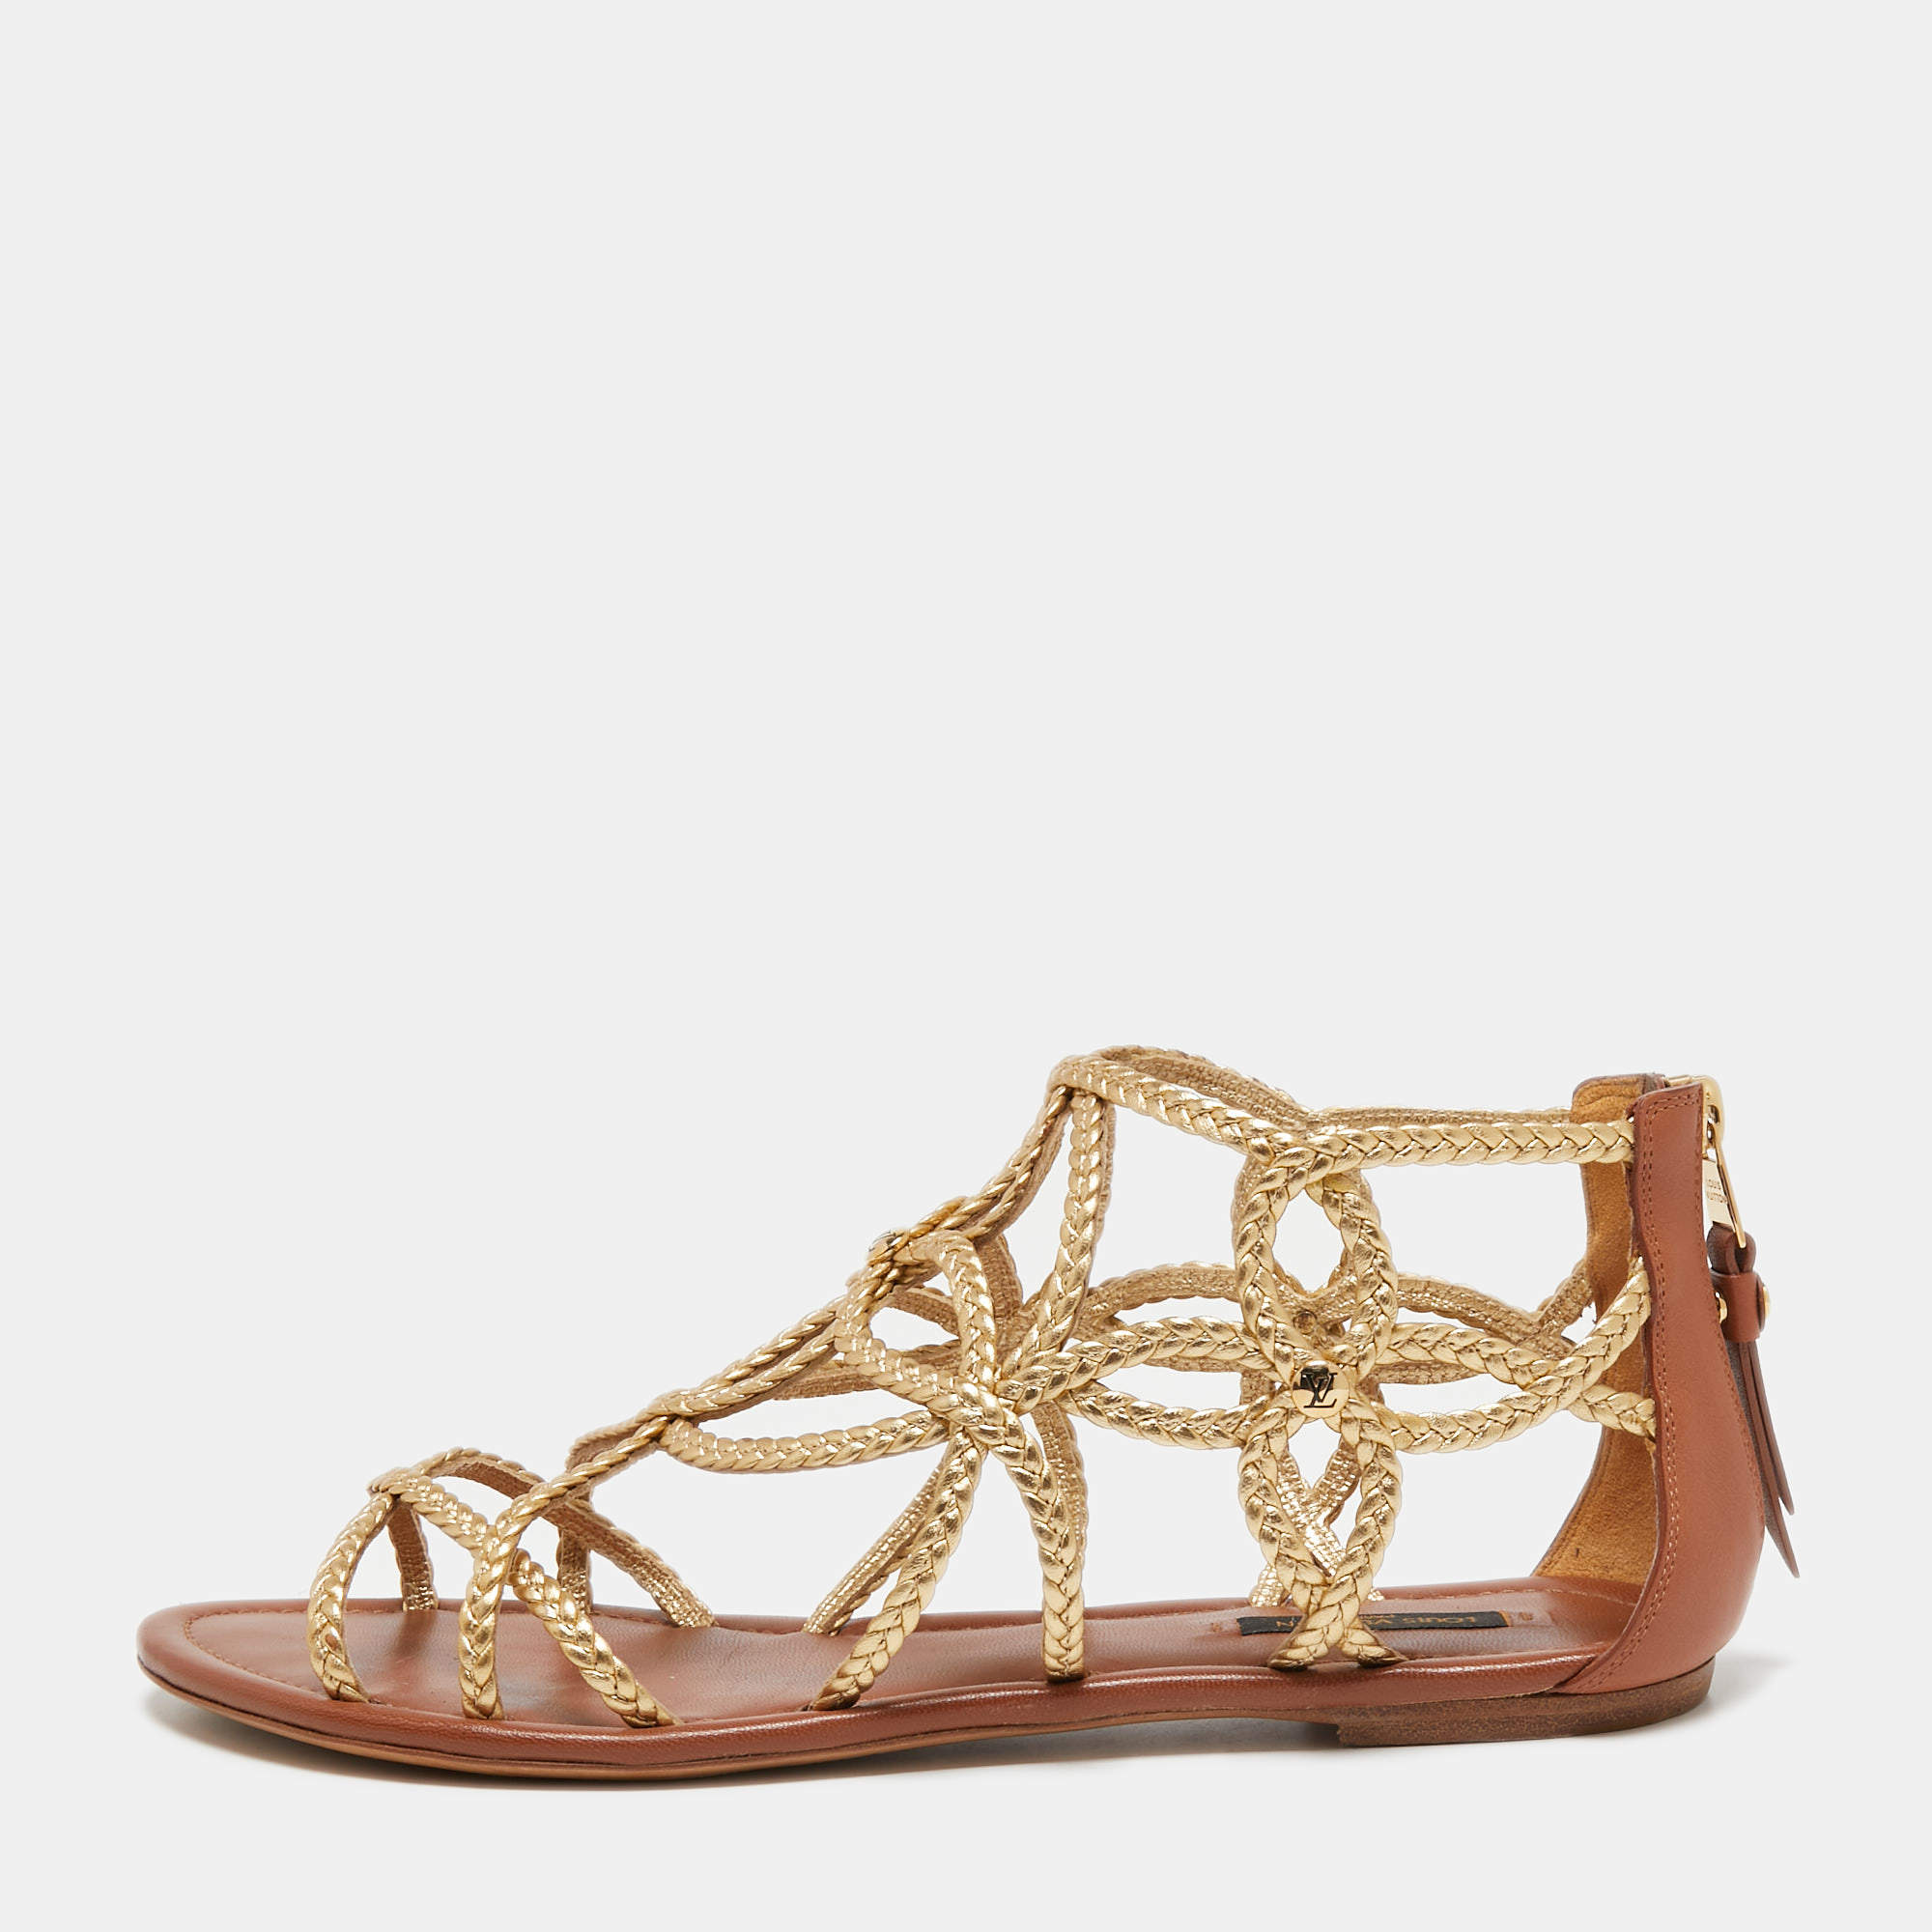 Louis Vuitton Gladiator Sandals for Women for sale